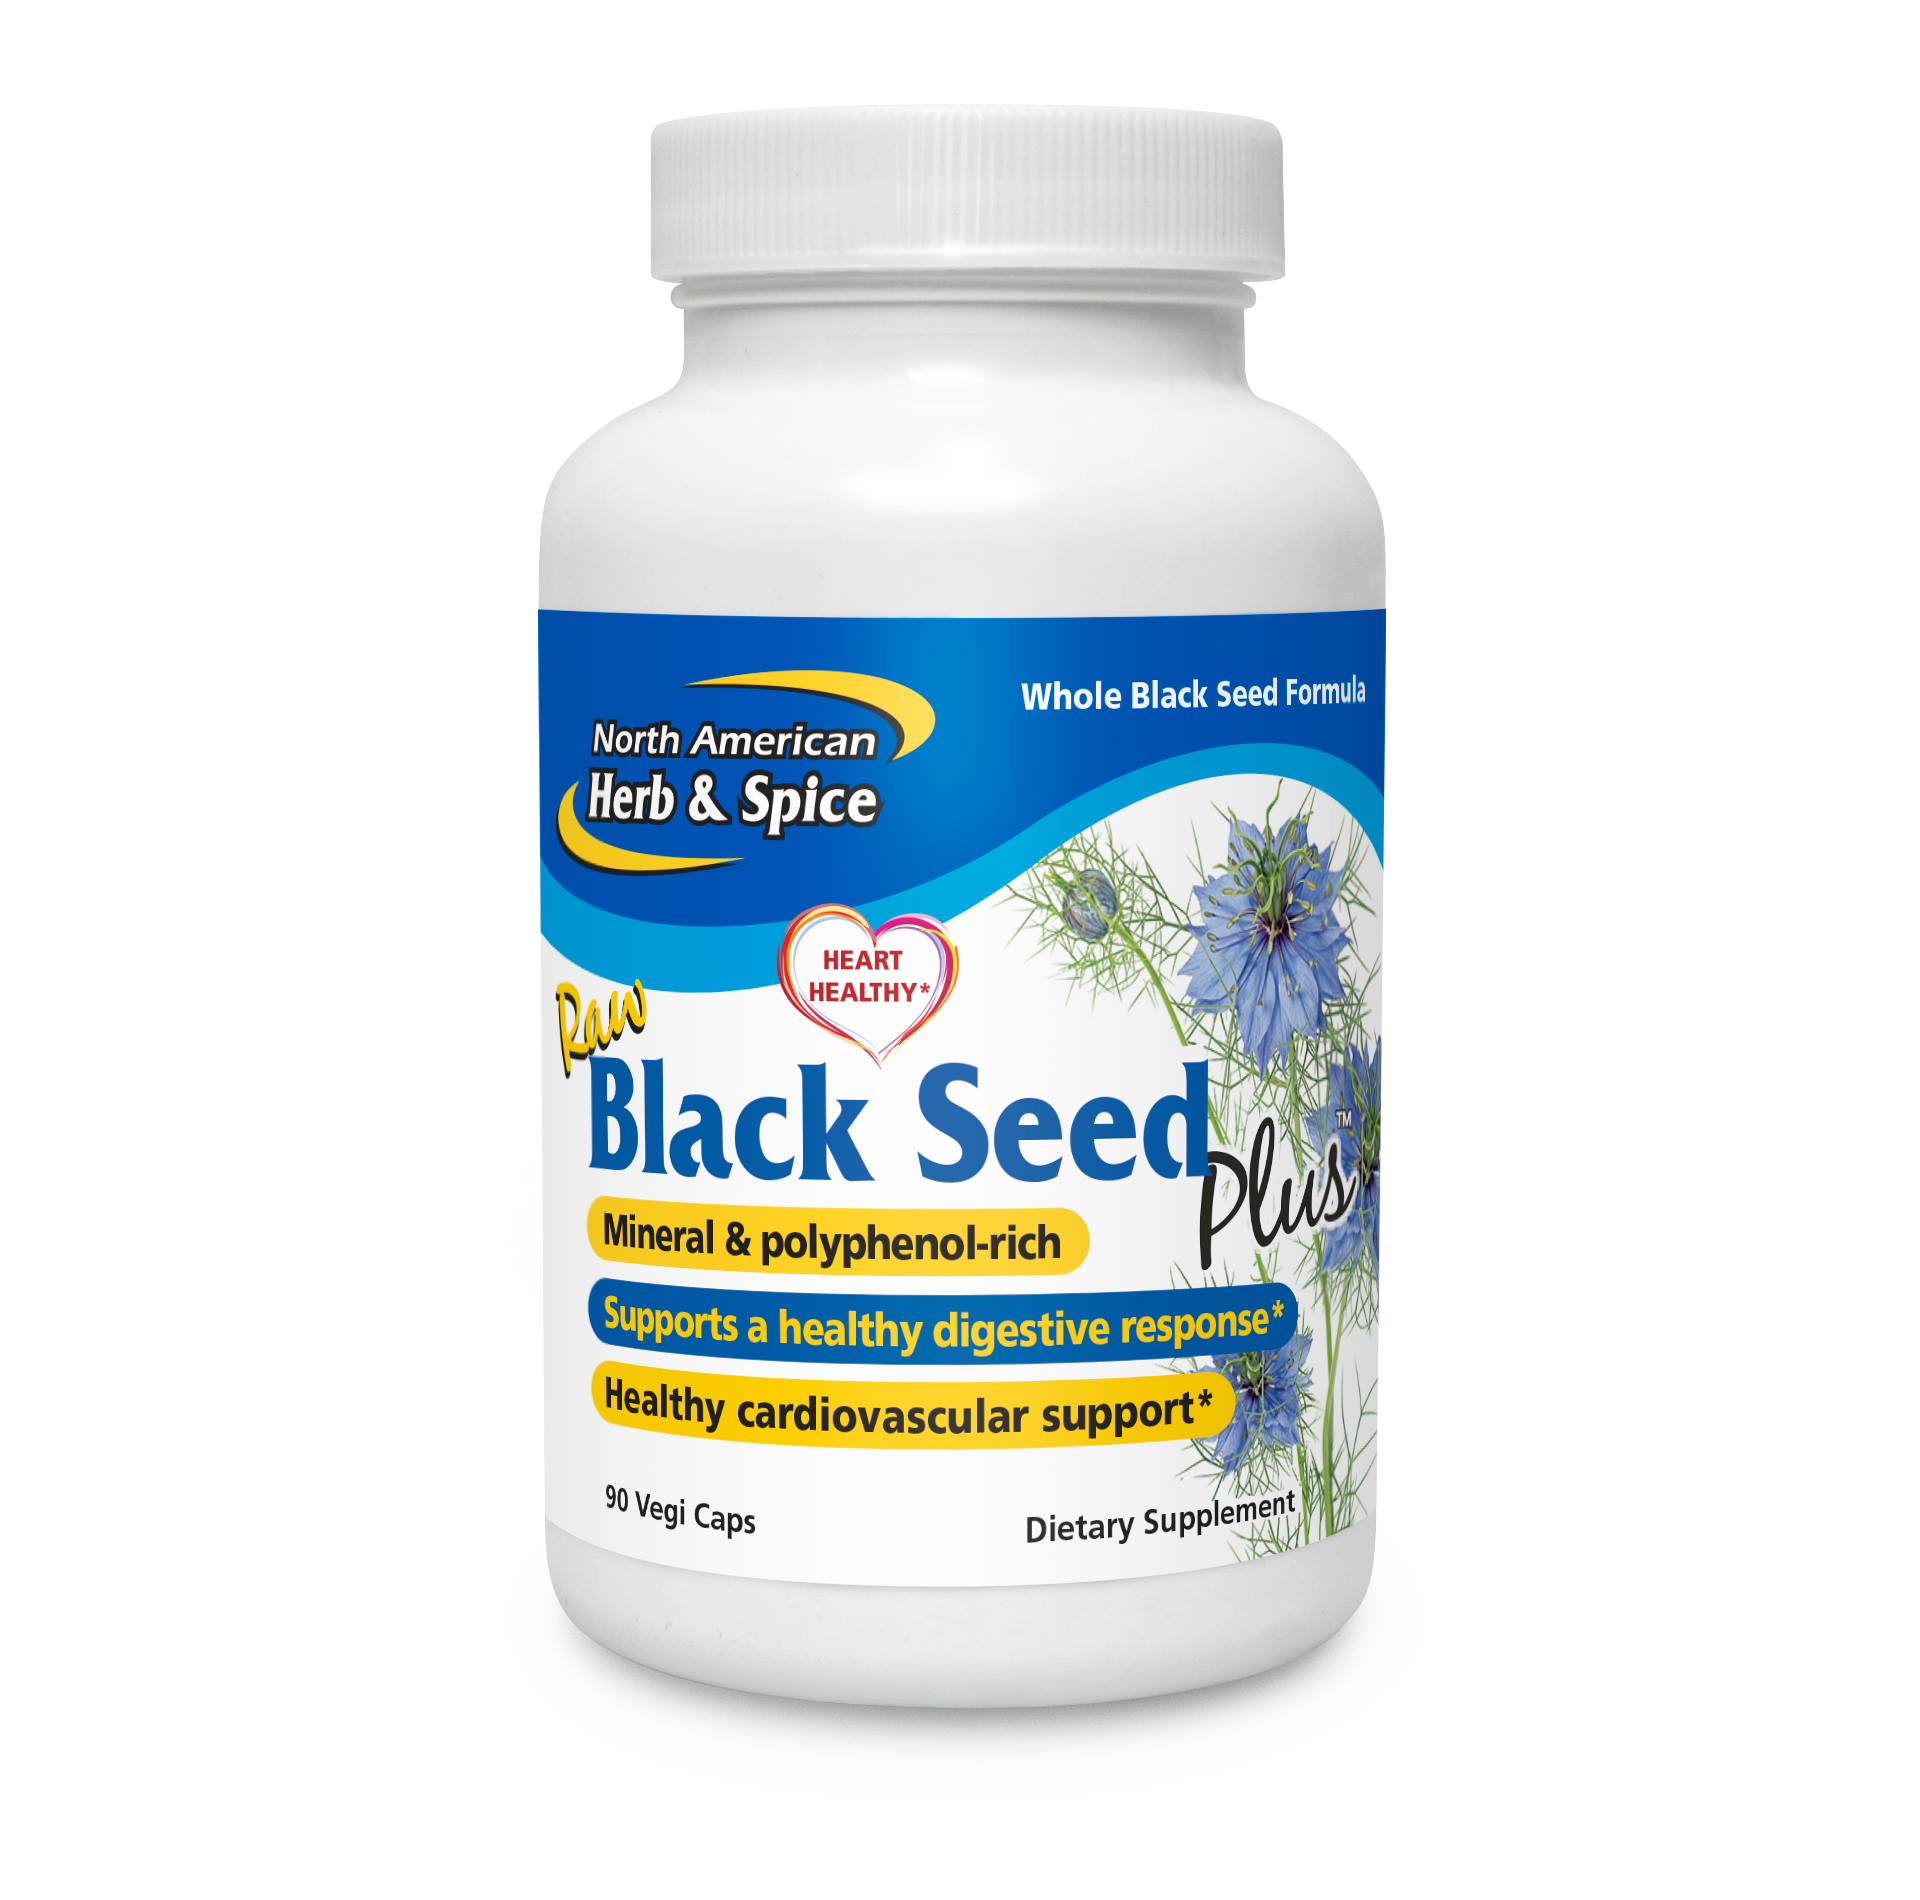 Featured image for “Black Seed-Plus Capsules”